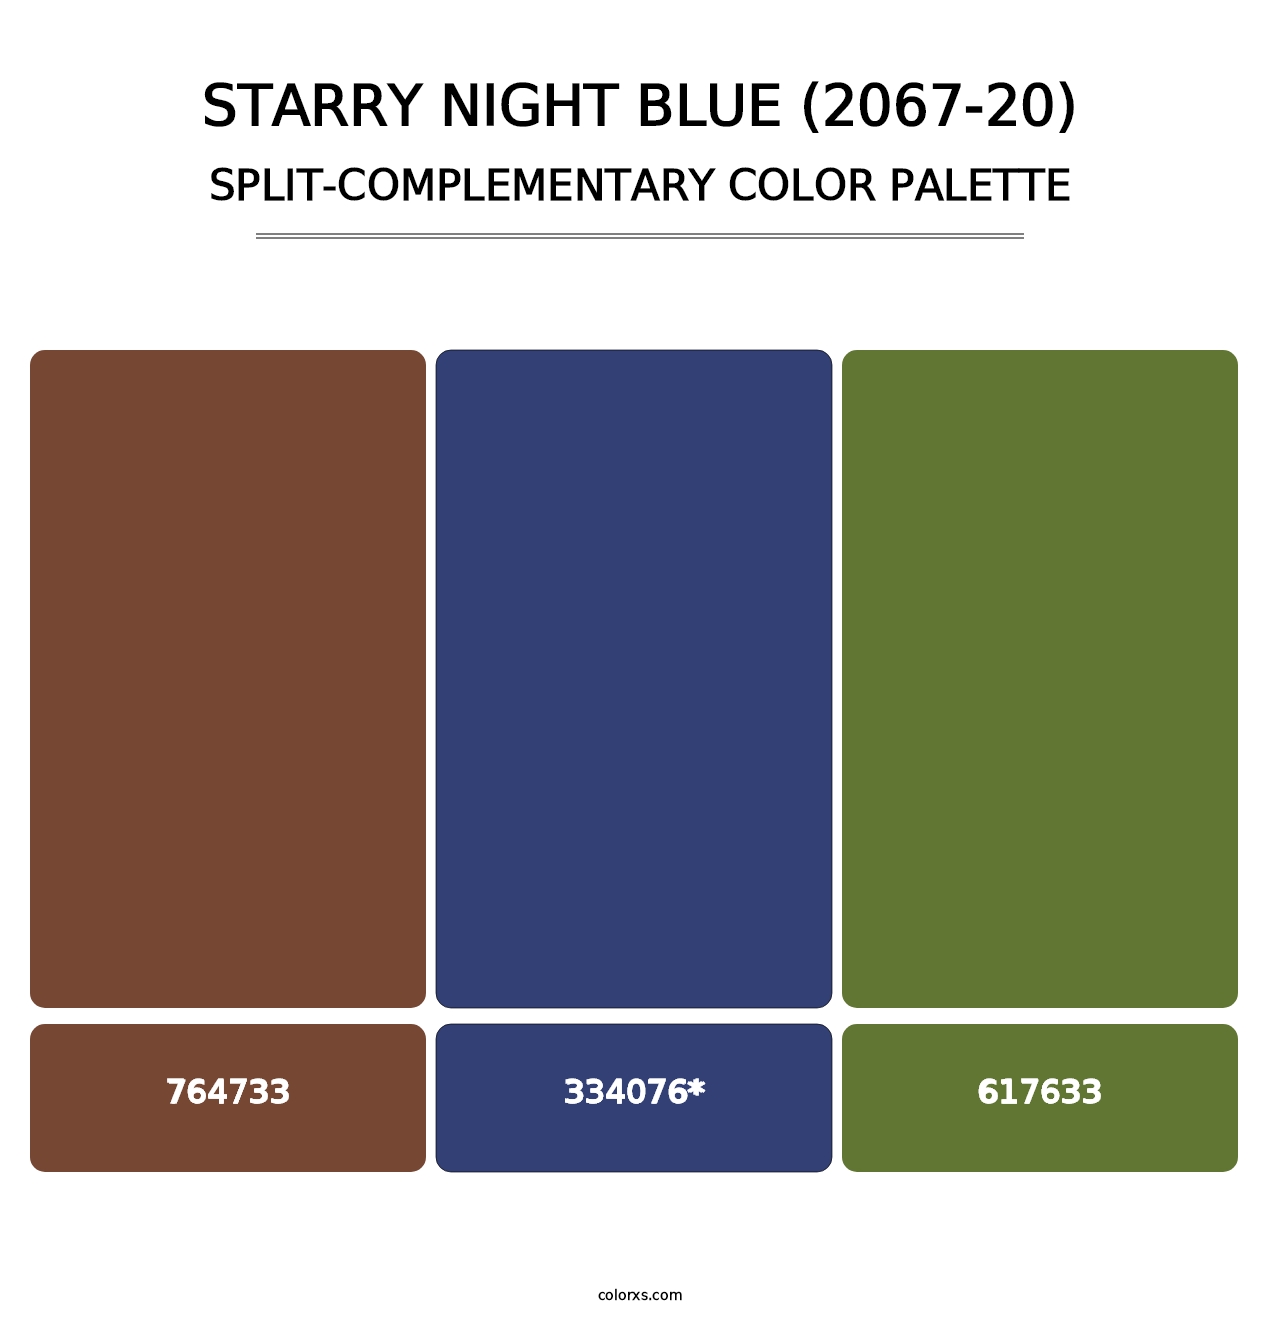 Starry Night Blue (2067-20) - Split-Complementary Color Palette